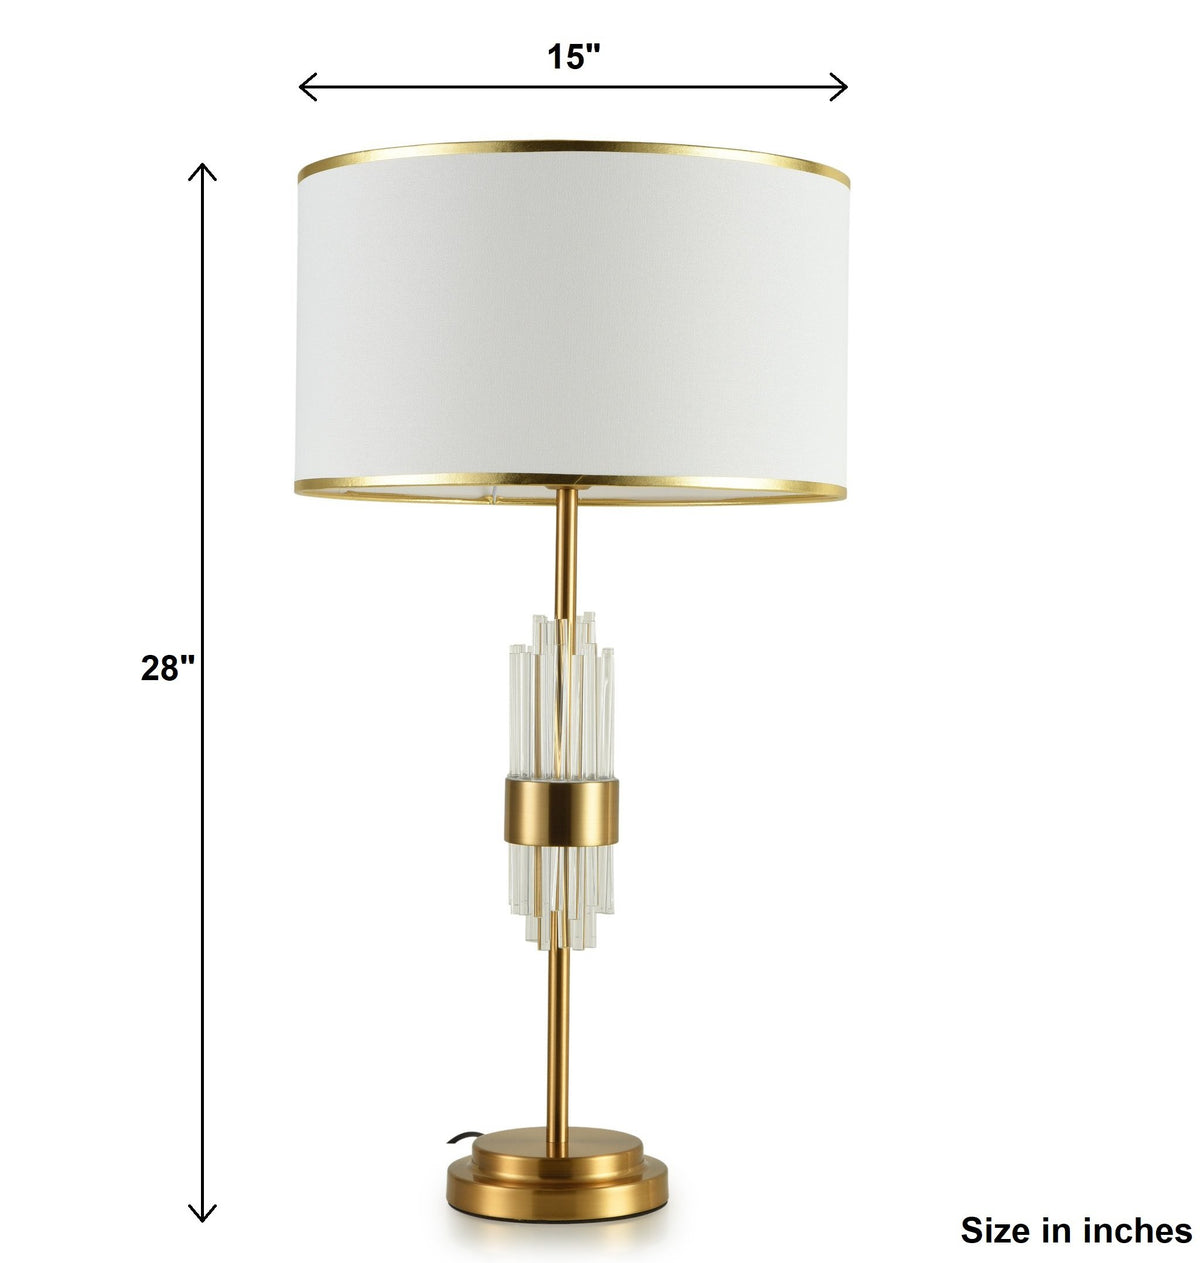 Never Mind Table Lamp Online India